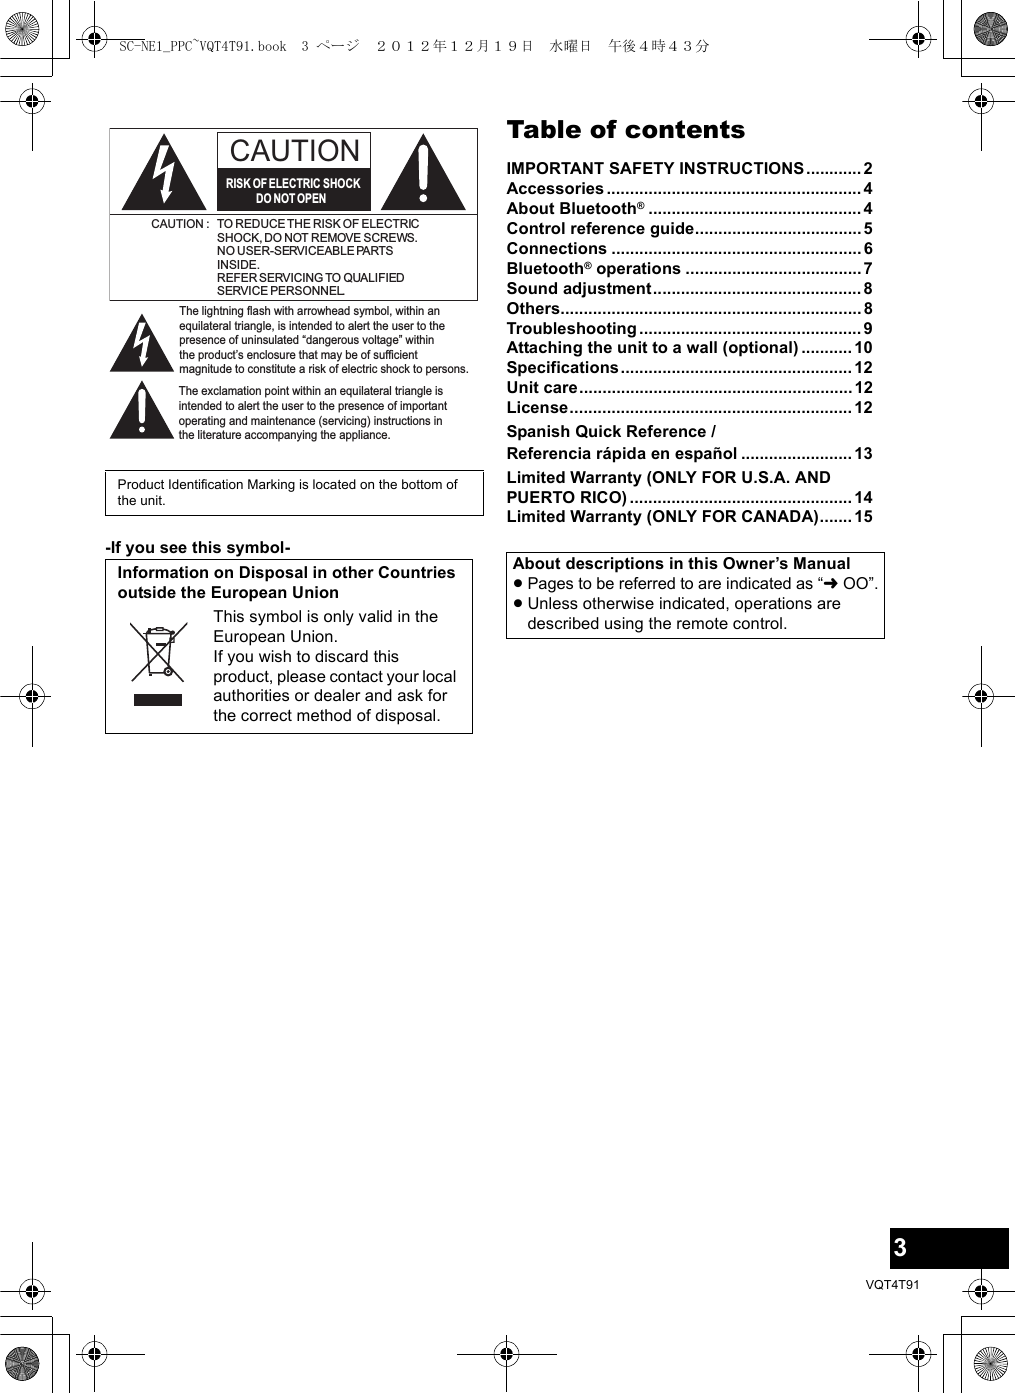 3VQT4T91-If you see this symbol-Table of contentsIMPORTANT SAFETY INSTRUCTIONS............2Accessories.......................................................4About Bluetooth®..............................................4Control reference guide....................................5Connections ......................................................6Bluetooth® operations ...................................... 7Sound adjustment.............................................8Others.................................................................8Troubleshooting ................................................ 9Attaching the unit to a wall (optional) ........... 10Specifications..................................................12Unit care...........................................................12License.............................................................12Spanish Quick Reference / Referencia rápida en español ........................ 13Limited Warranty (ONLY FOR U.S.A. AND PUERTO RICO) ................................................ 14Limited Warranty (ONLY FOR CANADA).......15Product Identification Marking is located on the bottom of the unit.Information on Disposal in other Countries outside the European UnionThis symbol is only valid in the European Union.If you wish to discard this product, please contact your local authorities or dealer and ask for the correct method of disposal.The lightning flash with arrowhead symbol, within an equilateral triangle, is intended to alert the user to the presence of uninsulated “dangerous voltage” within the product’s enclosure that may be of sufficient magnitude to constitute a risk of electric shock to persons.CAUTIONCAUTION : TO REDUCE THE RISK OF ELECTRICSHOCK, DO NOT REMOVE SCREWS.NO USER-SERVICEABLE PARTSINSIDE.REFER SERVICING TO QUALIFIEDSERVICE PERSONNEL.The exclamation point within an equilateral triangle is intended to alert the user to the presence of important operating and maintenance (servicing) instructions in the literature accompanying the appliance.RISK OF ELECTRIC SHOCKDO NOT OPENAbout descriptions in this Owner’s Manual≥Pages to be referred to are indicated as “lOO”.≥Unless otherwise indicated, operations are described using the remote control.SC-NE1_PPC~VQT4T91.book  3 ページ  ２０１２年１２月１９日　水曜日　午後４時４３分